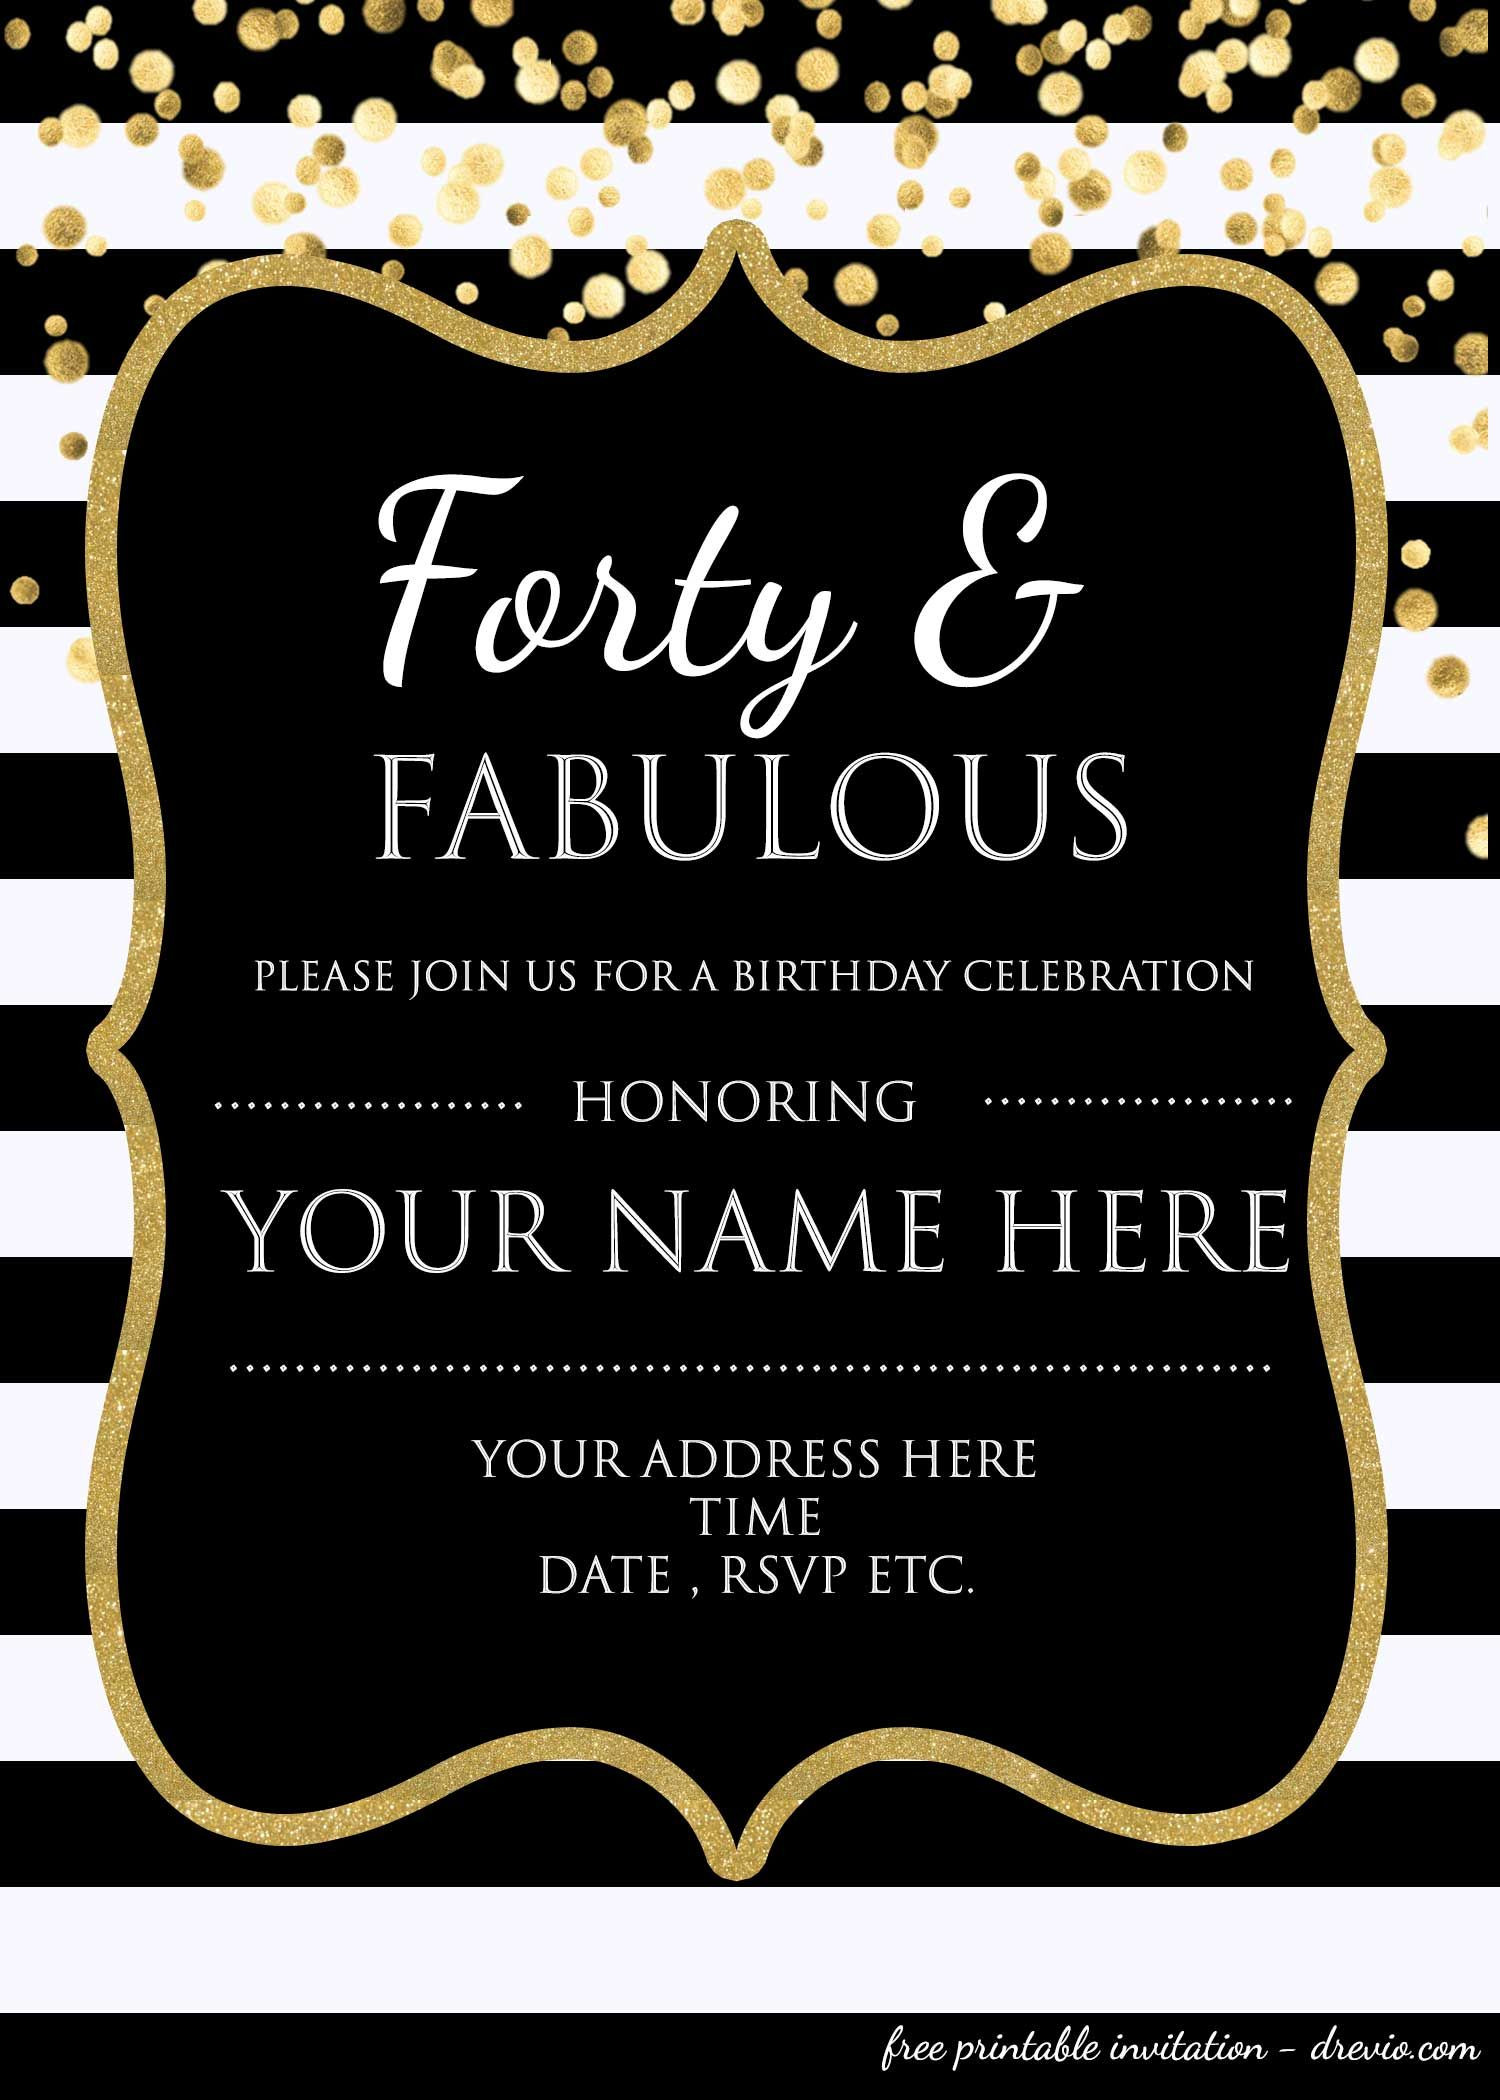 40Th Birthday Invitations For Her
 Forty & Fabulous 40th Birthday Invitation Template PSD